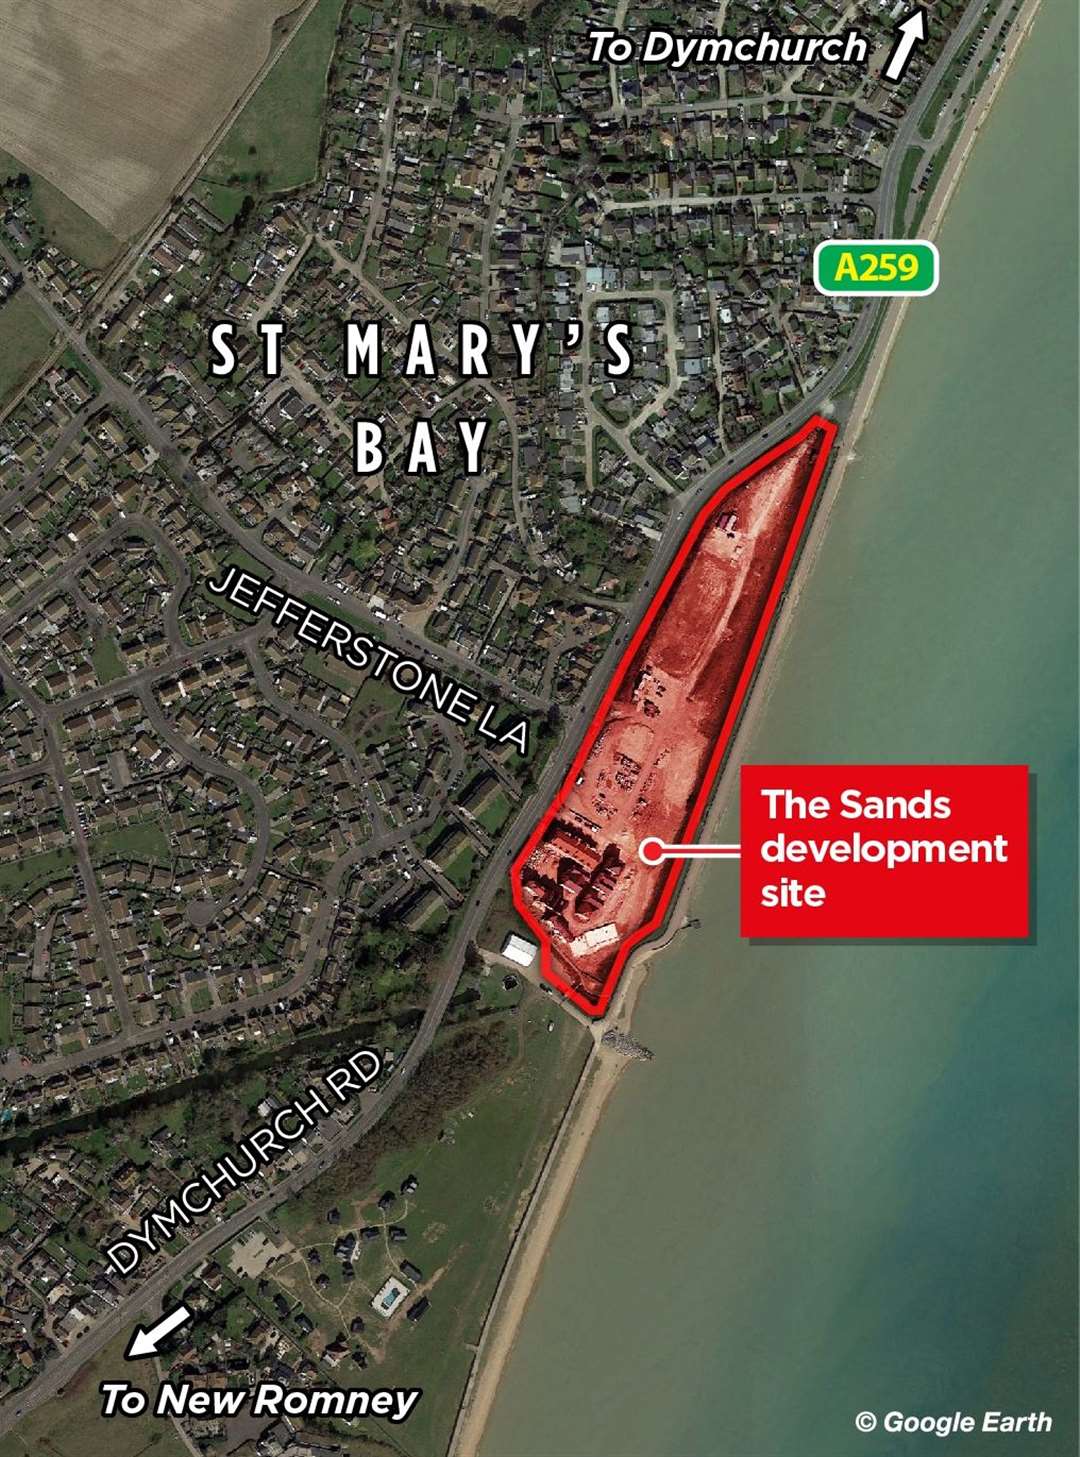 The Sands site is off the A259 Dymchurch Road in St Mary’s Bay